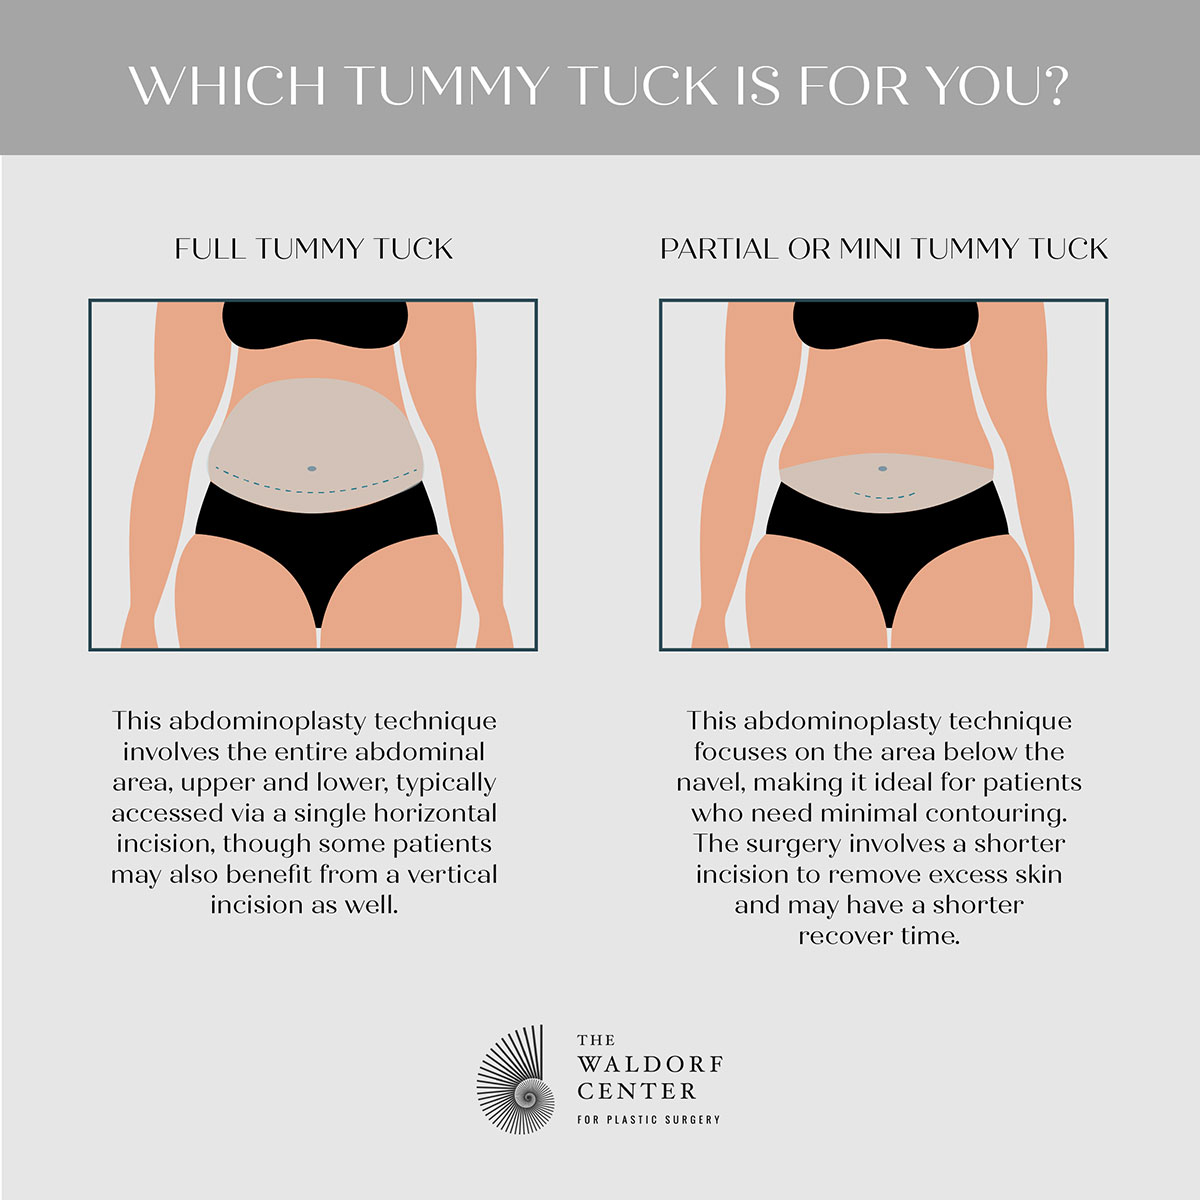 Tummy Tuck or Liposuction: What's the Difference, and Which Is